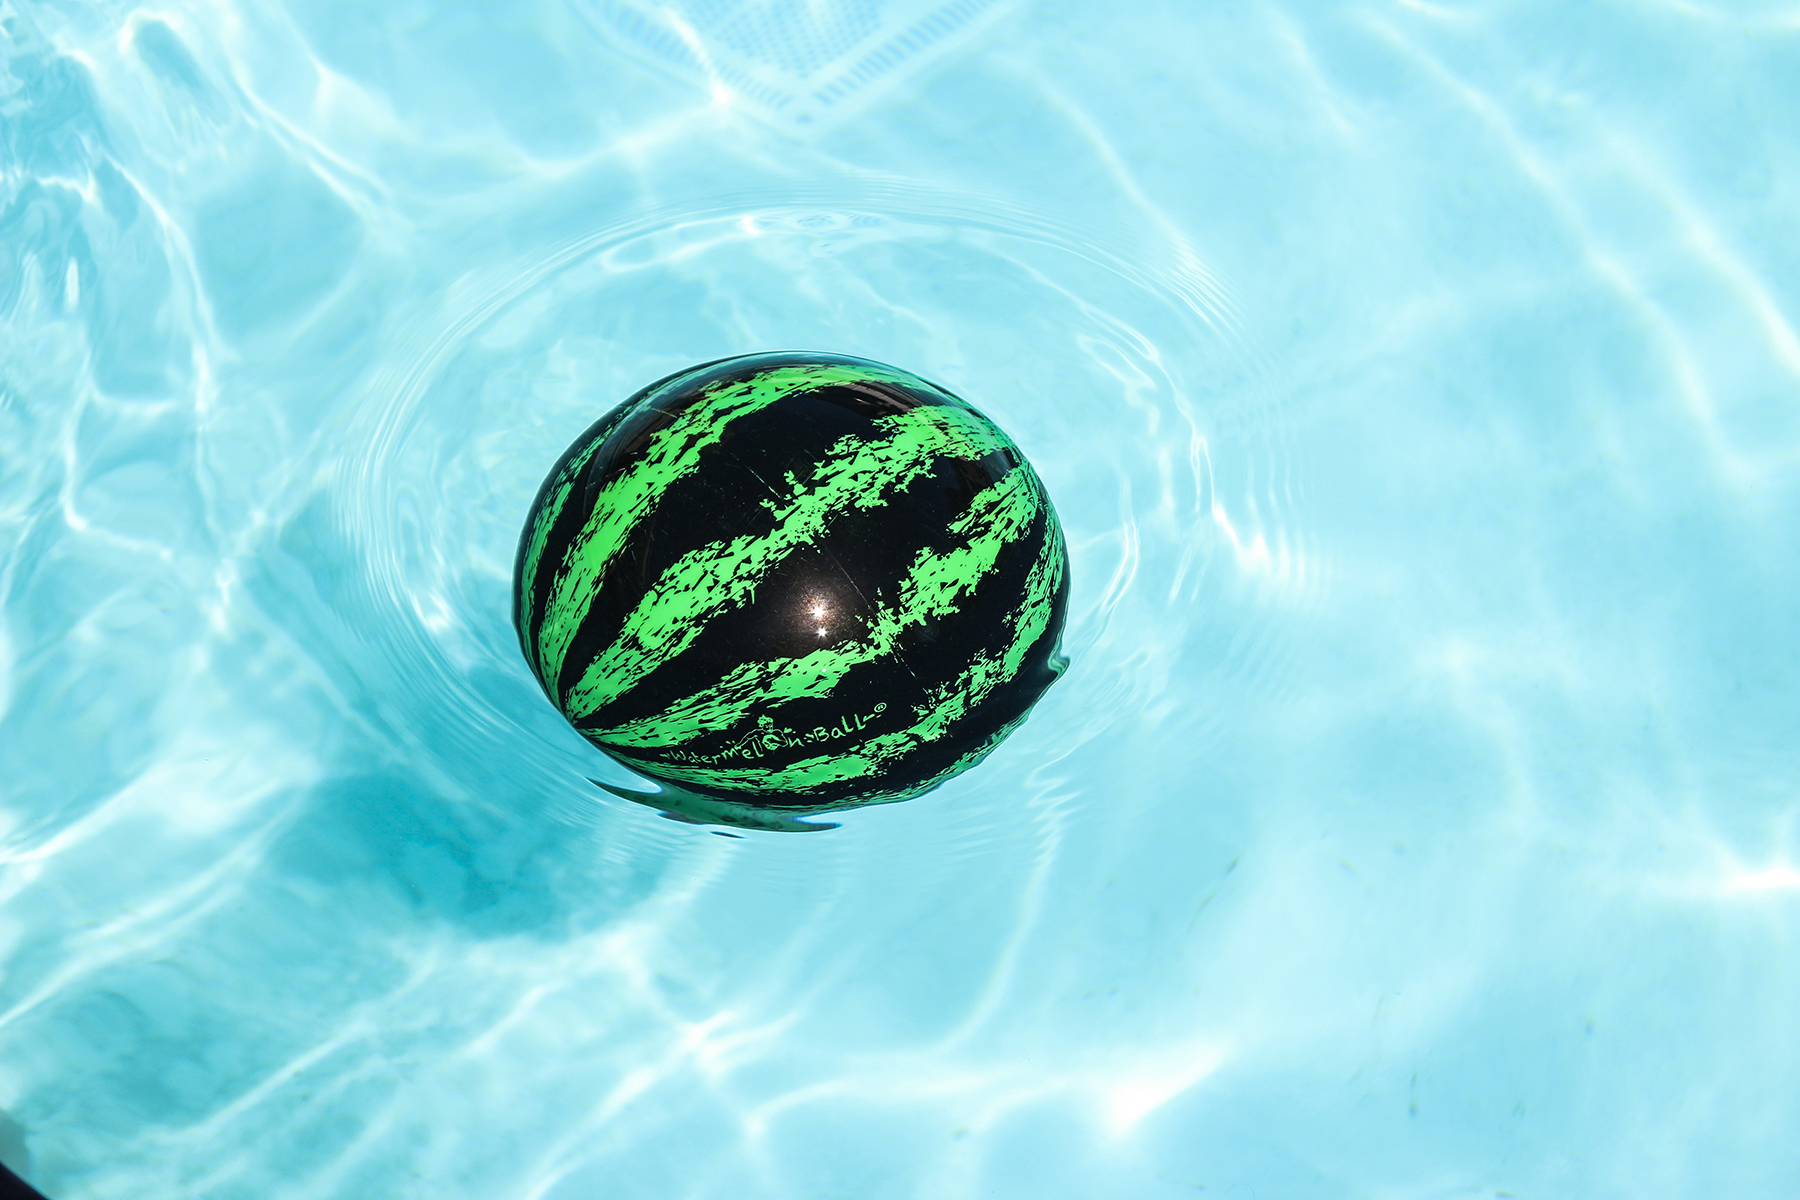 Watermelon Ball slowly rises to the top